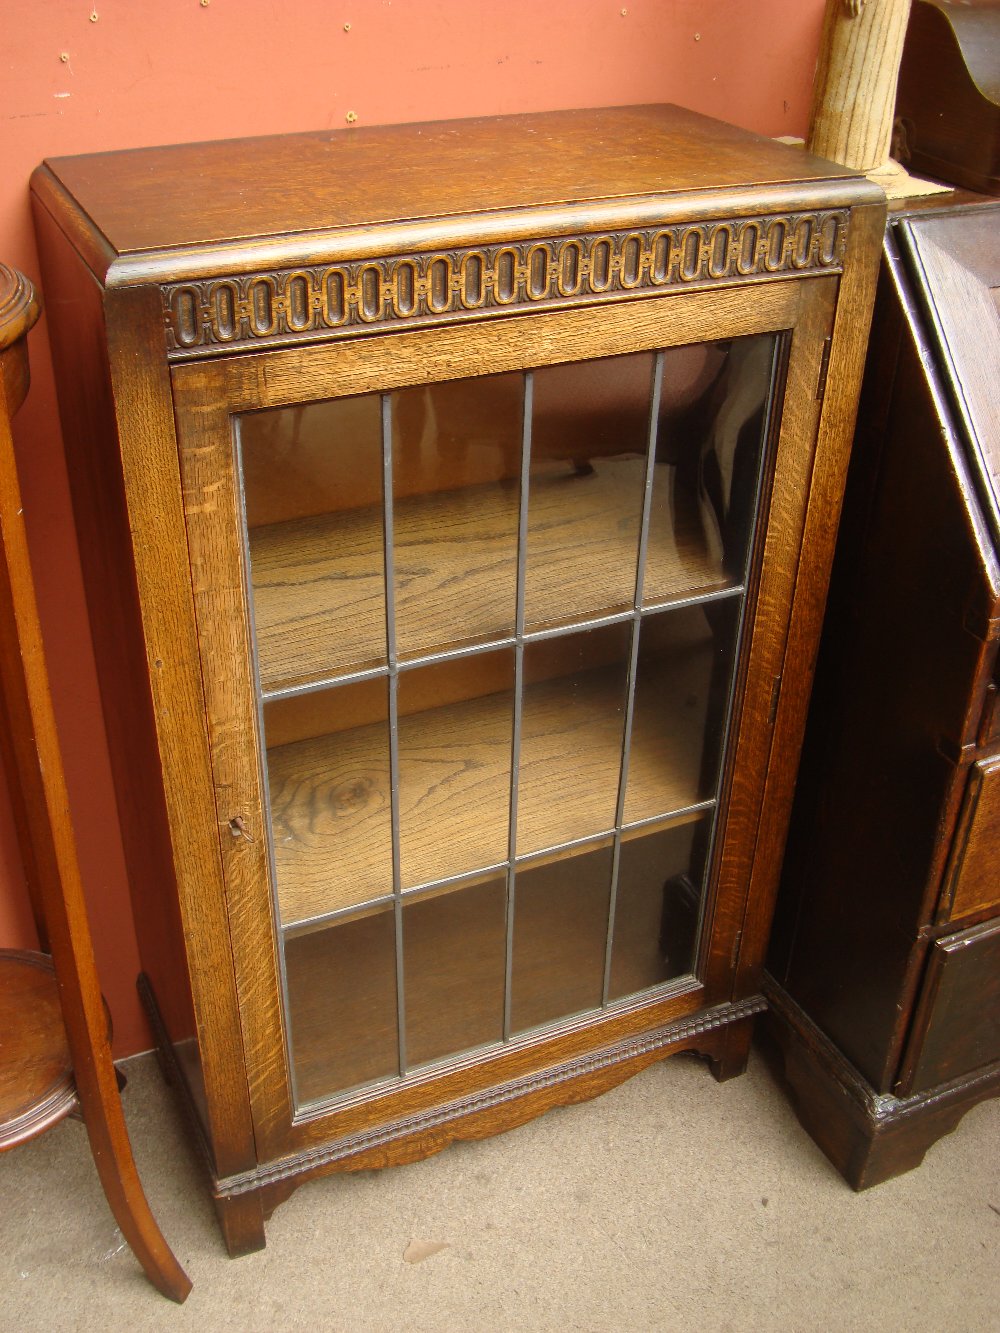 A 1930's glass fronted bookcase.